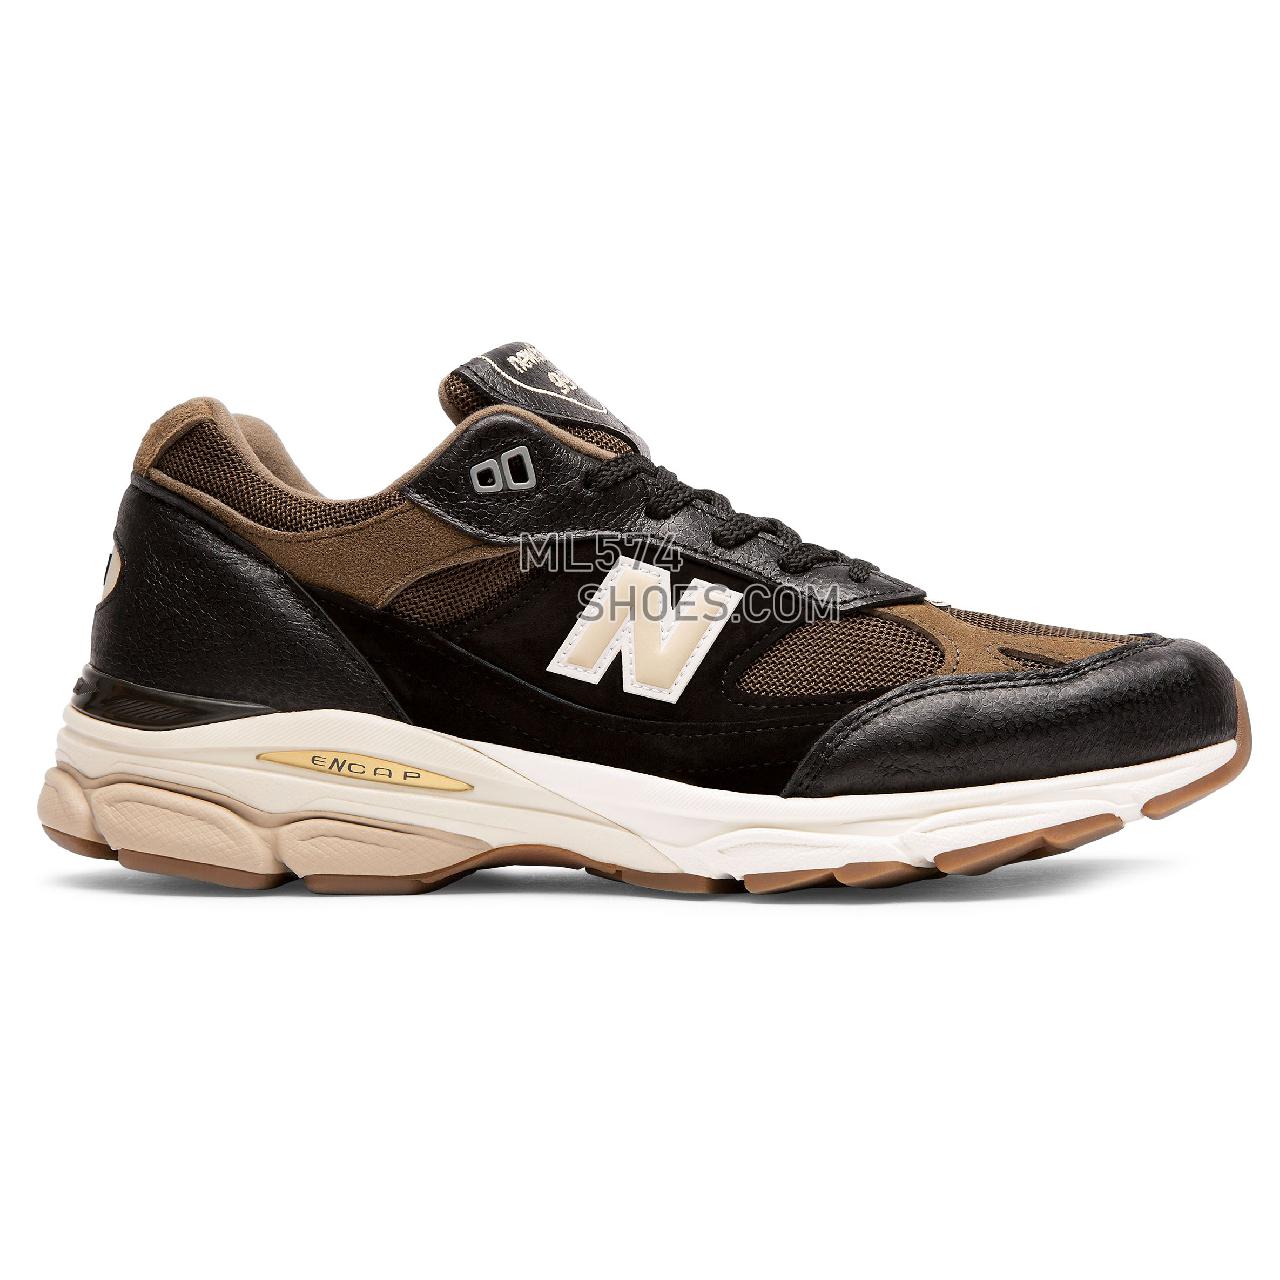 New Balance 991.9 Made in UK - Men's 9919 - Classic Black with Olive - M9919CV